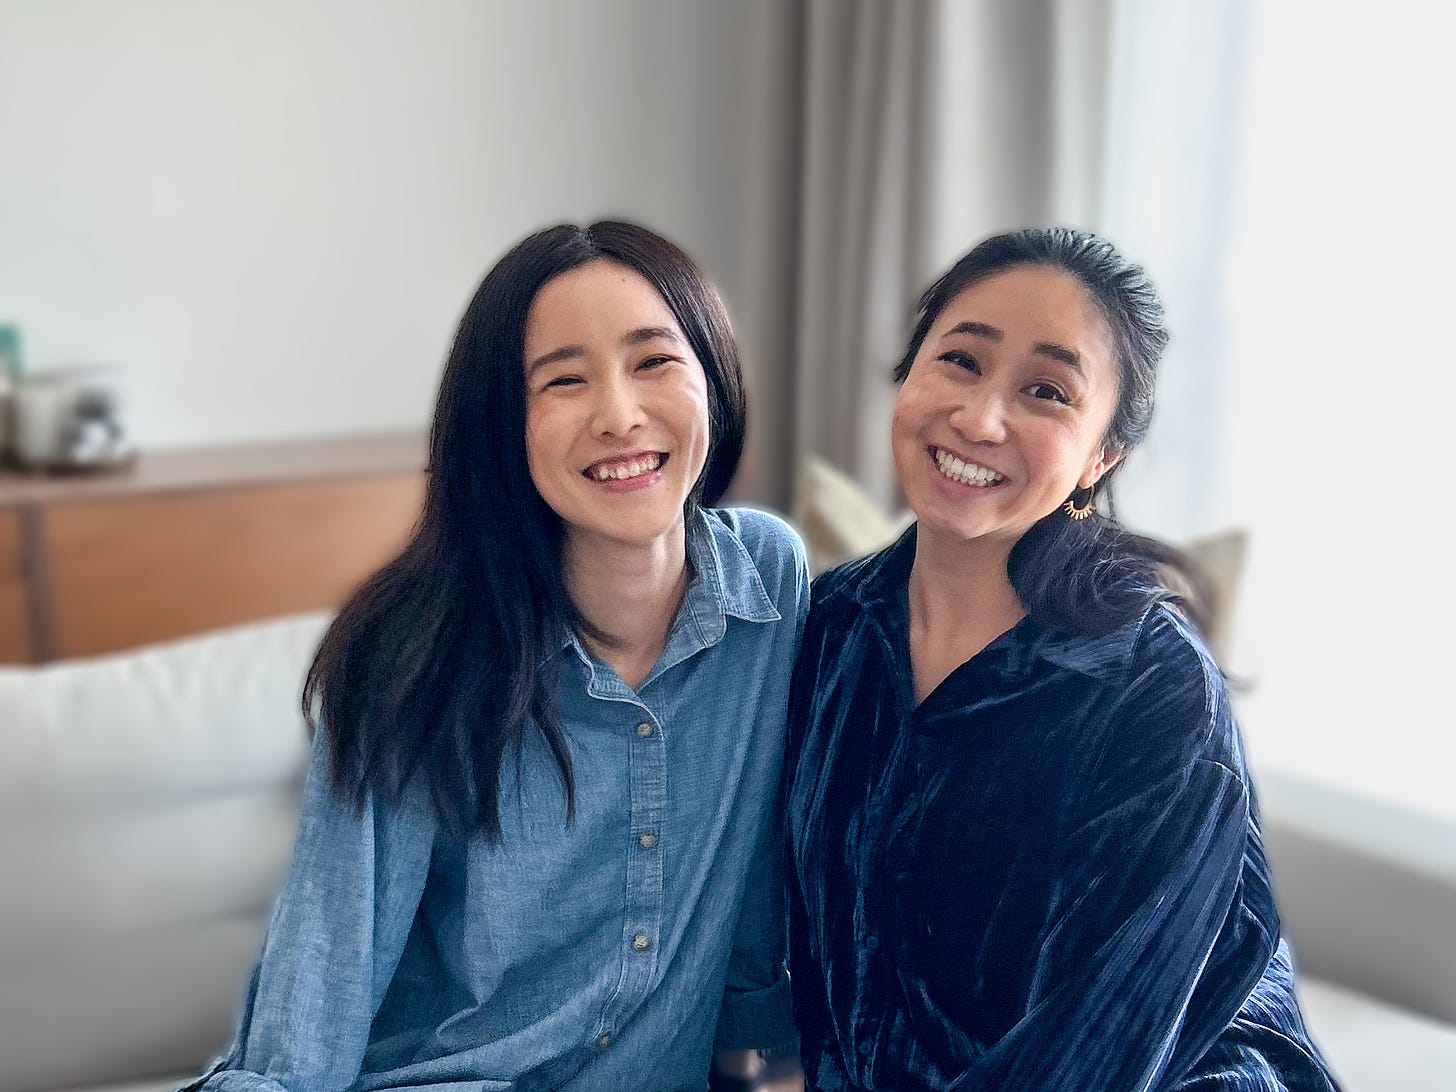 Two woman both with black hair sitting on a couch smiling at the camera